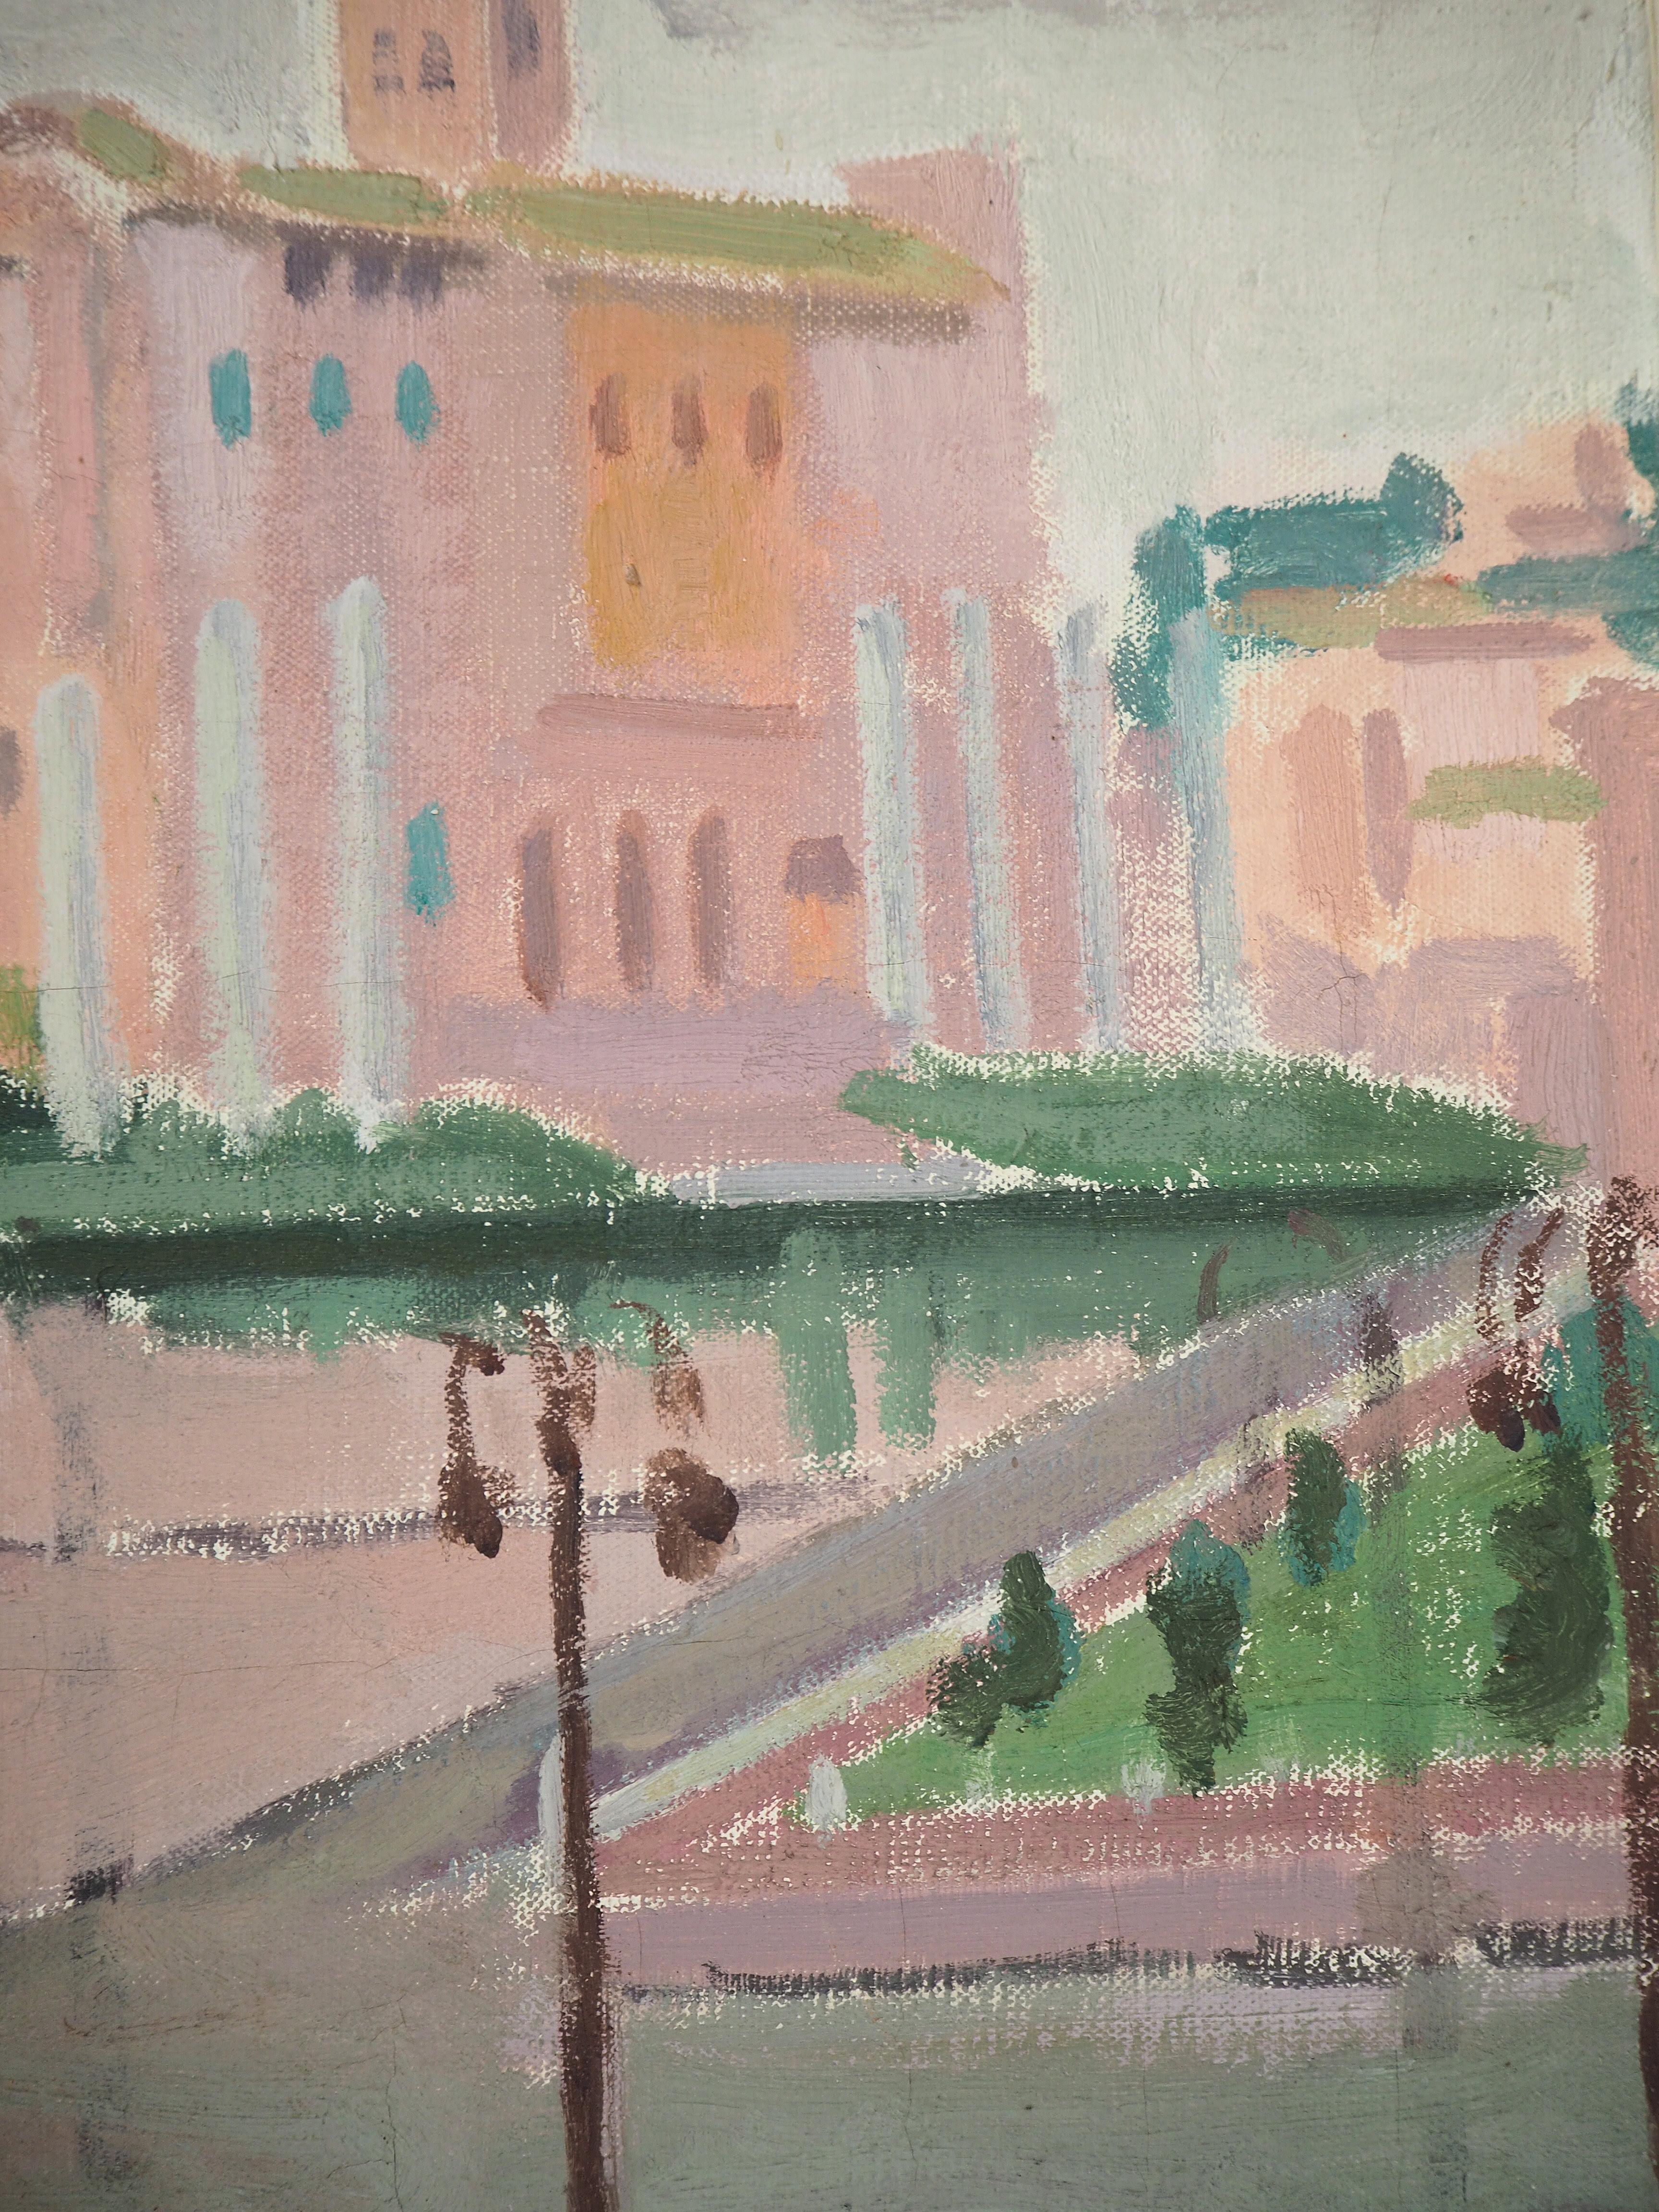 Jules CAVAILLES
Rome, The Forum Seen From the Colosseum

Original Oil on canvas
Signed on the lower right corner
On canvas 55 x 46 cm (c. 22 x 18 in)
Presented in a golden wood frame 76 x 66 cm (c. 29 x 26 in)

Very good condition, uses to the frame